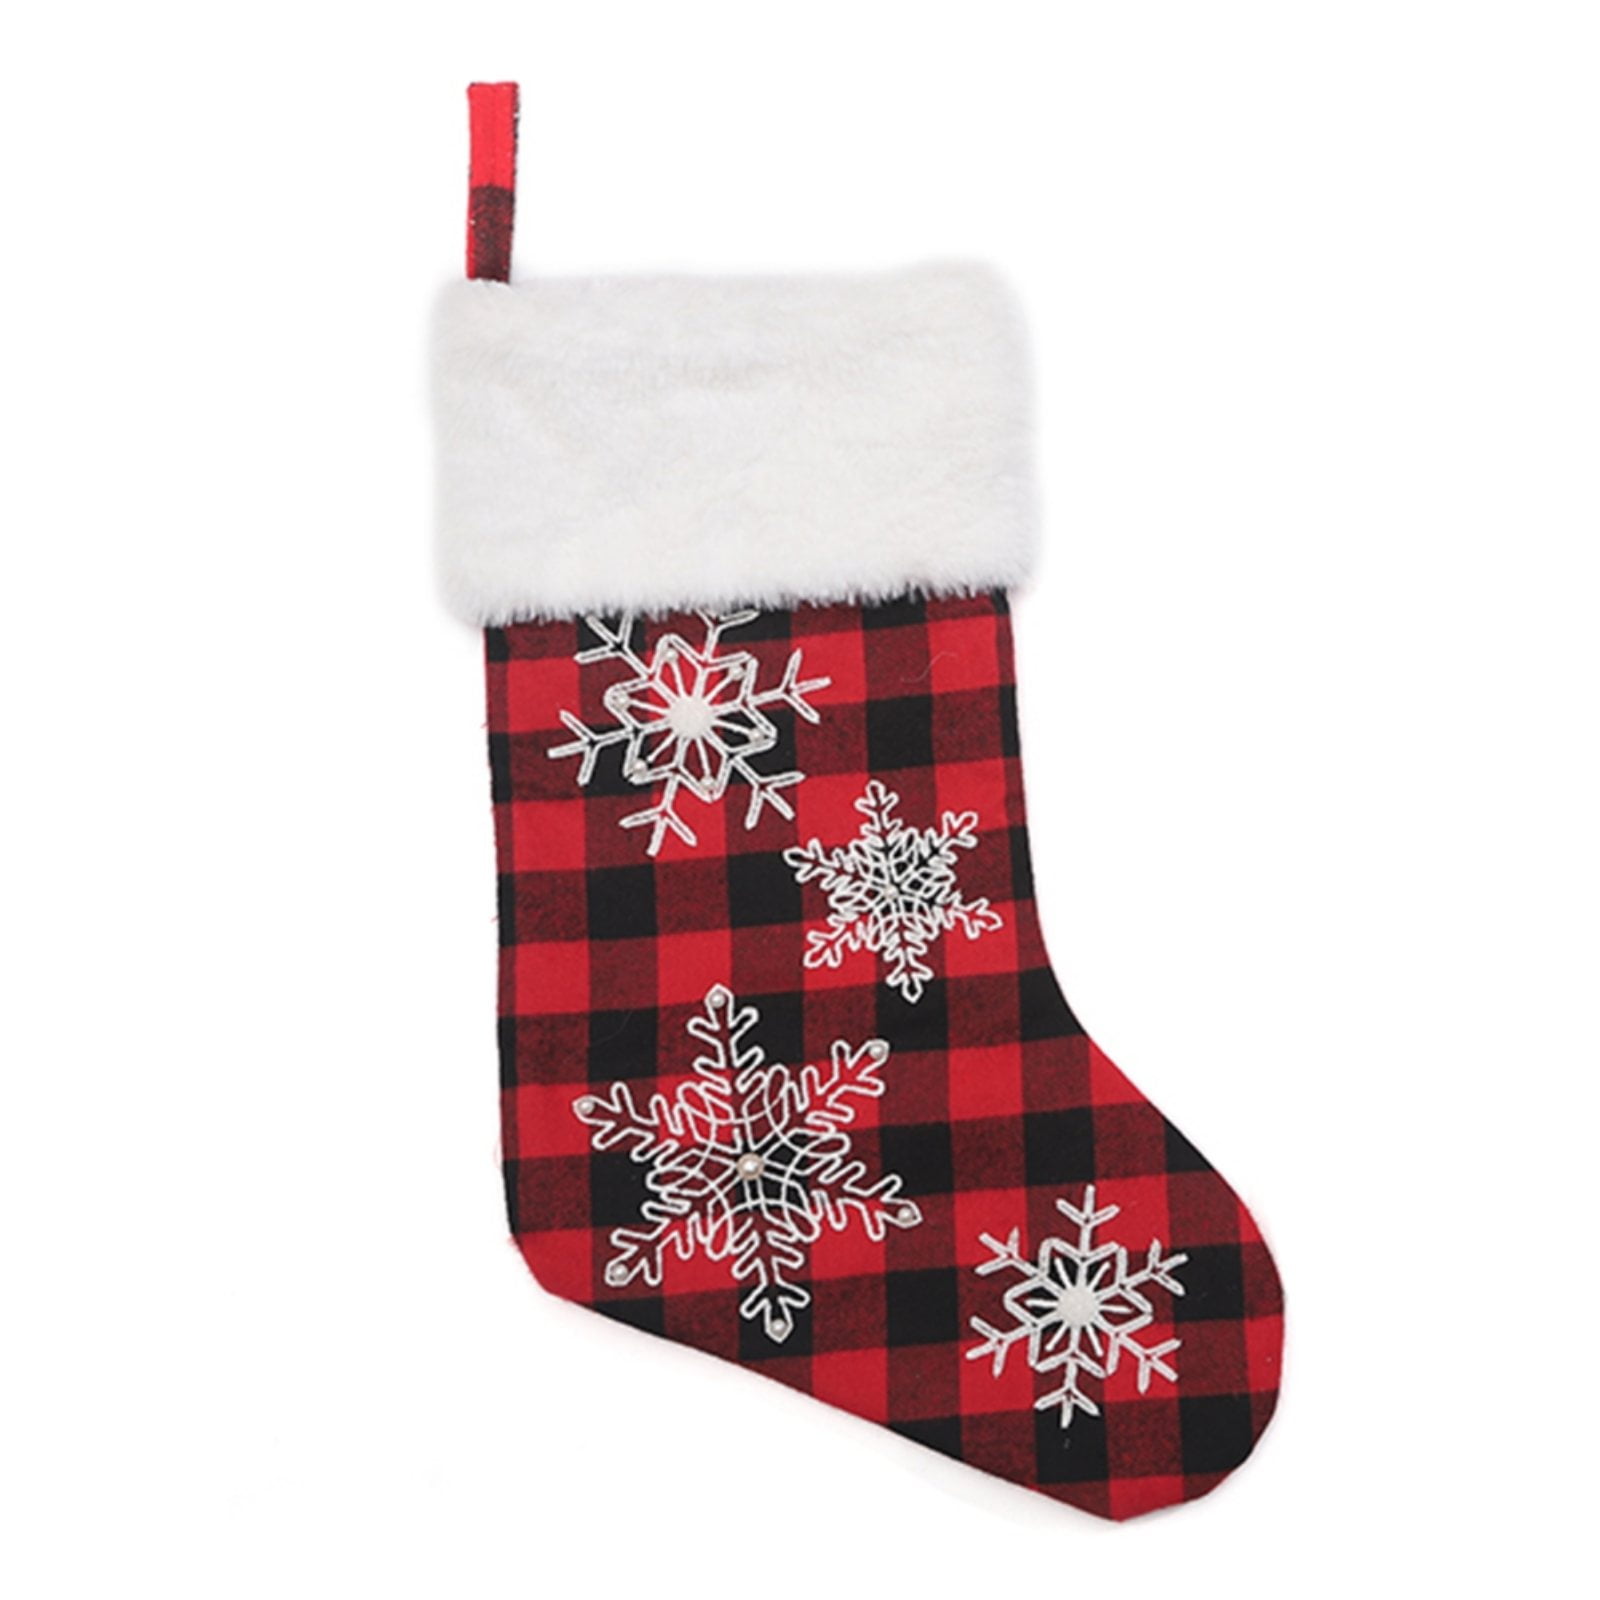 PLUSH 13" CHRISTMAS STOCKING RED & WHITE SOCK NWT HOLIDAY DECORATING GIFTS 